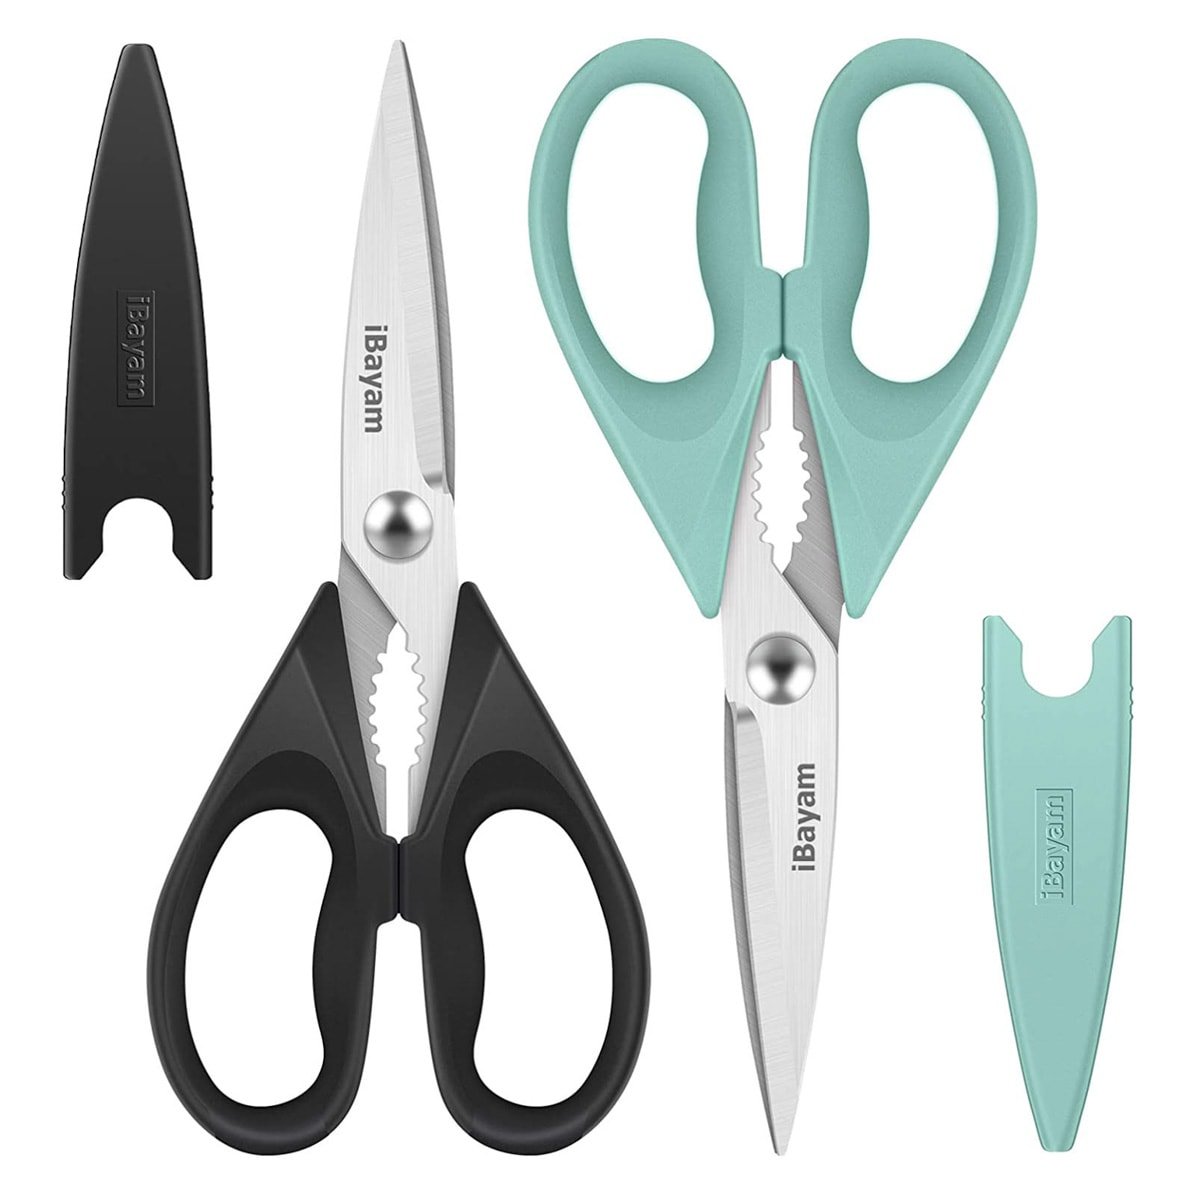 Two pairs of dishwasher safe kitchen shears.